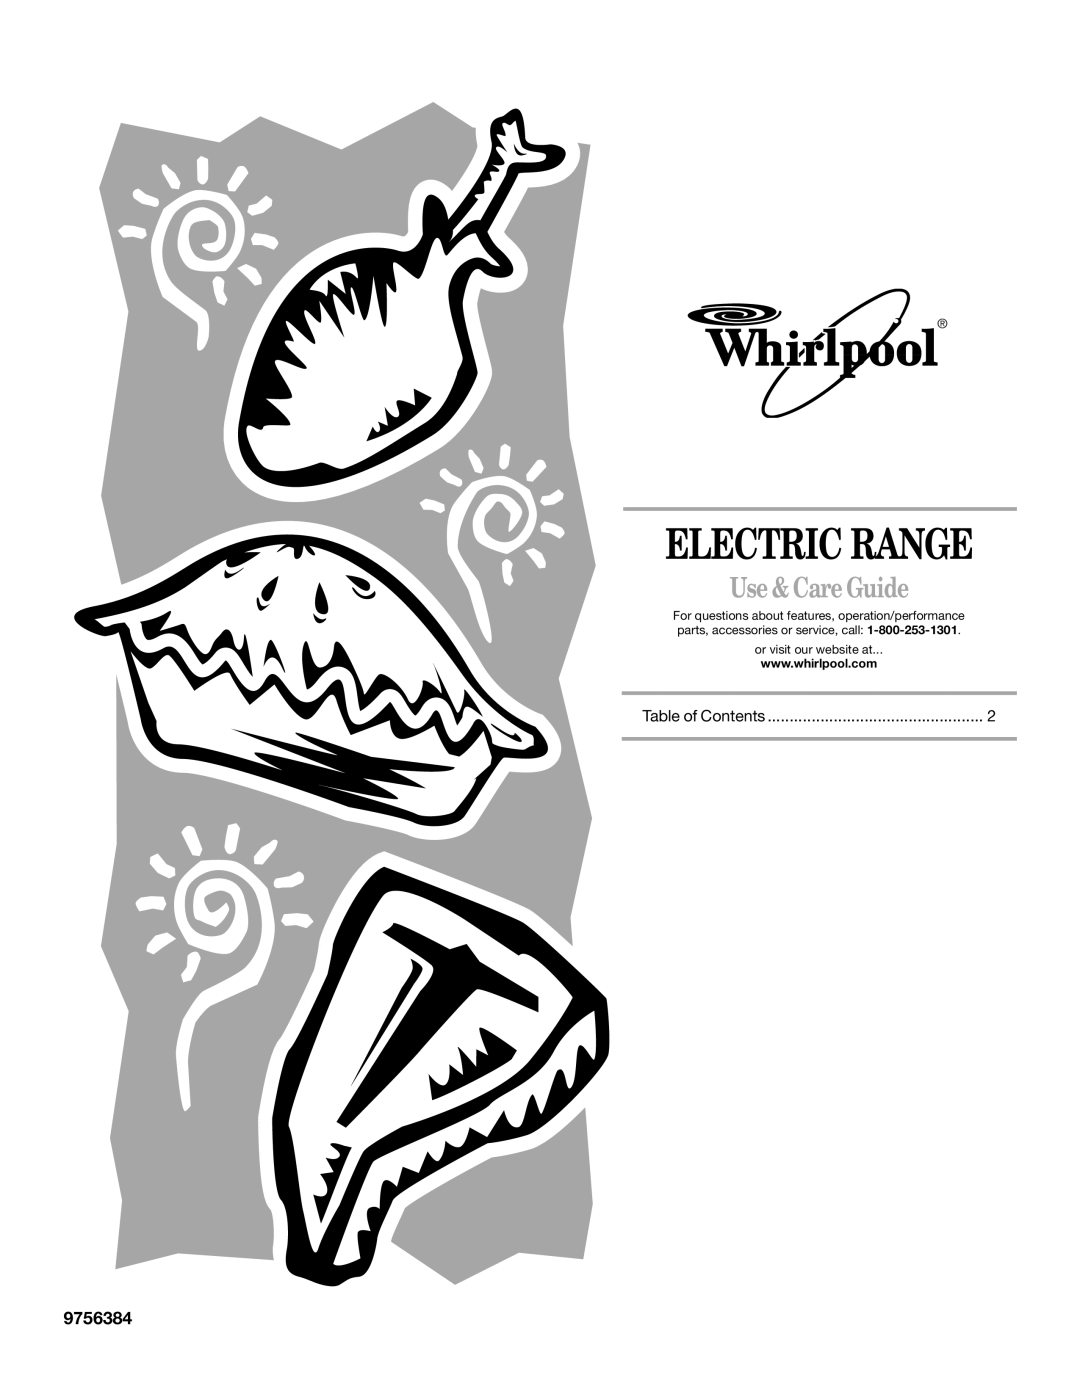 Whirlpool 9754384 manual Electric Range, Use & Care Guide, 9756384, or visit our website at 